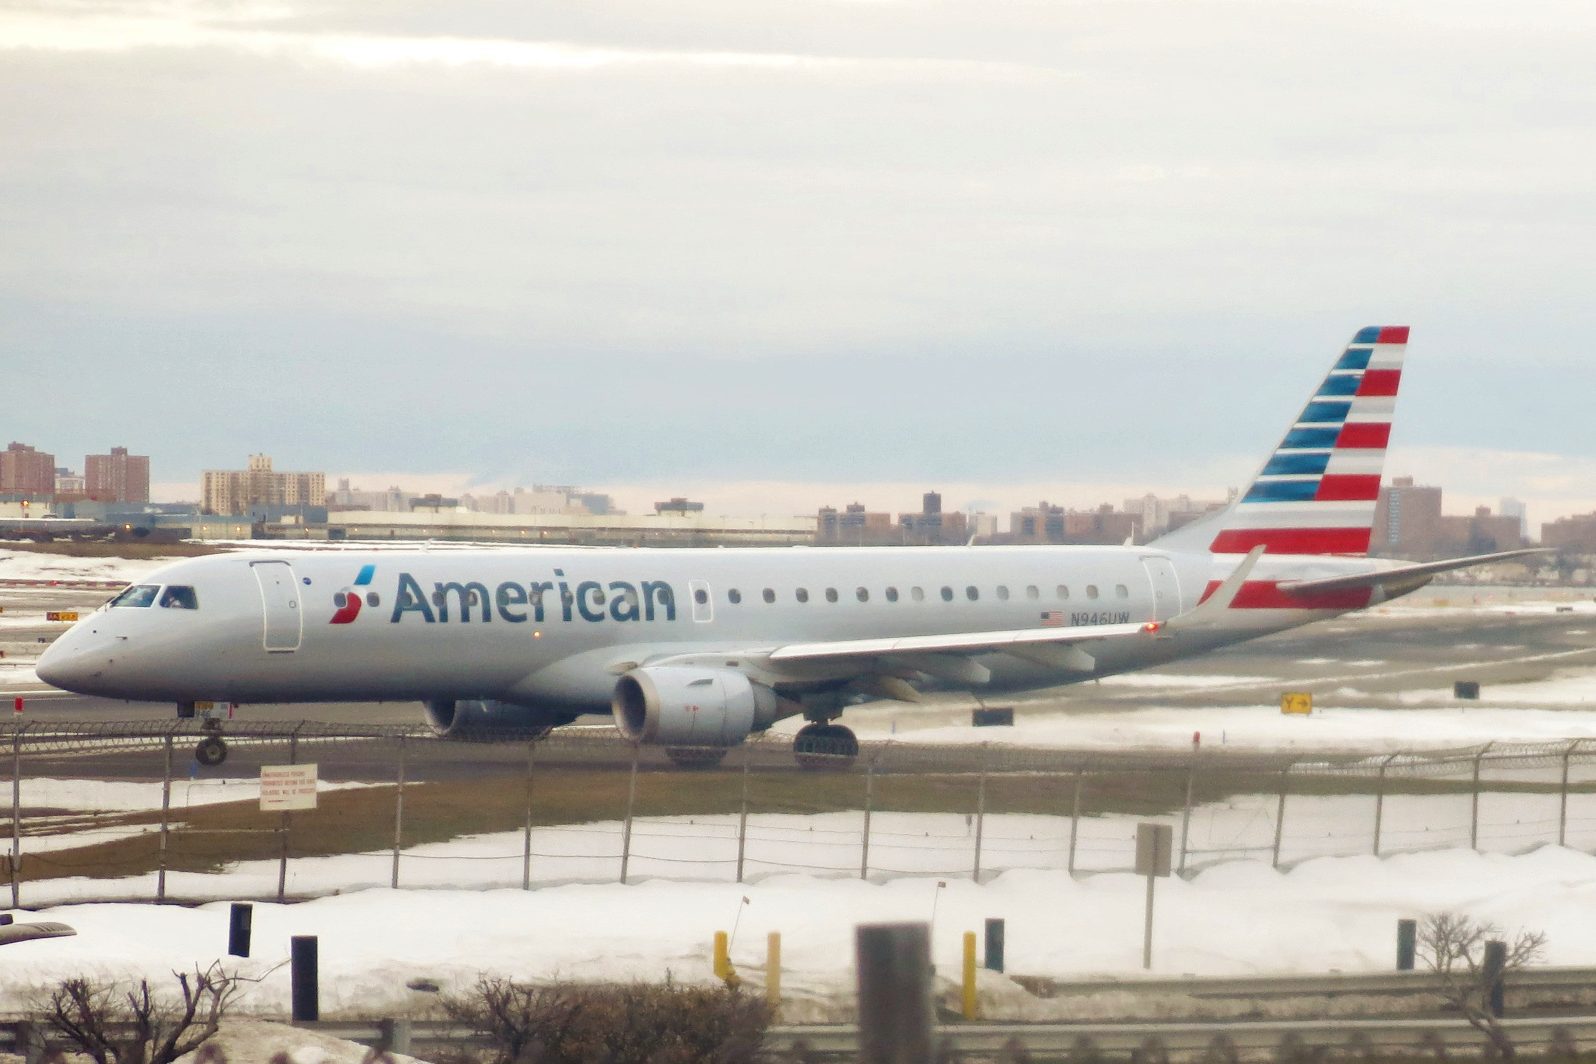 American Airlines said Saturday it plans to cut 75% of its international flights through May 6 and ground nearly all its widebody fleet due to coronavirus.